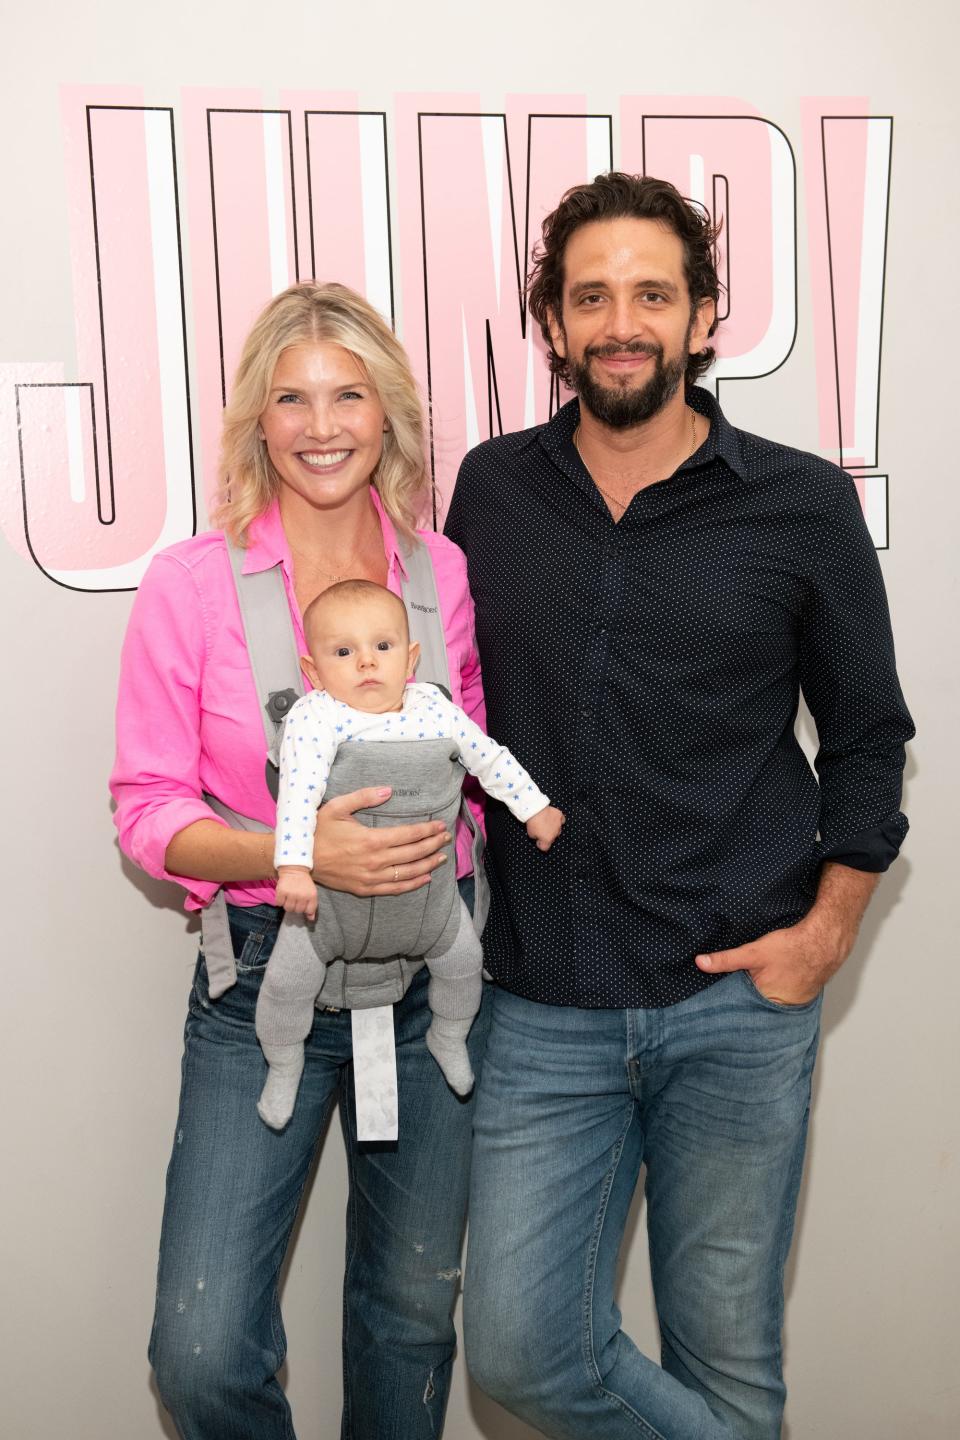 Amanda Kloots, Nick Cordero and their son Elvis attend the Beyond Yoga x Amanda Kloots Collaboration Launch Event on August 27, 2019 in New York City.